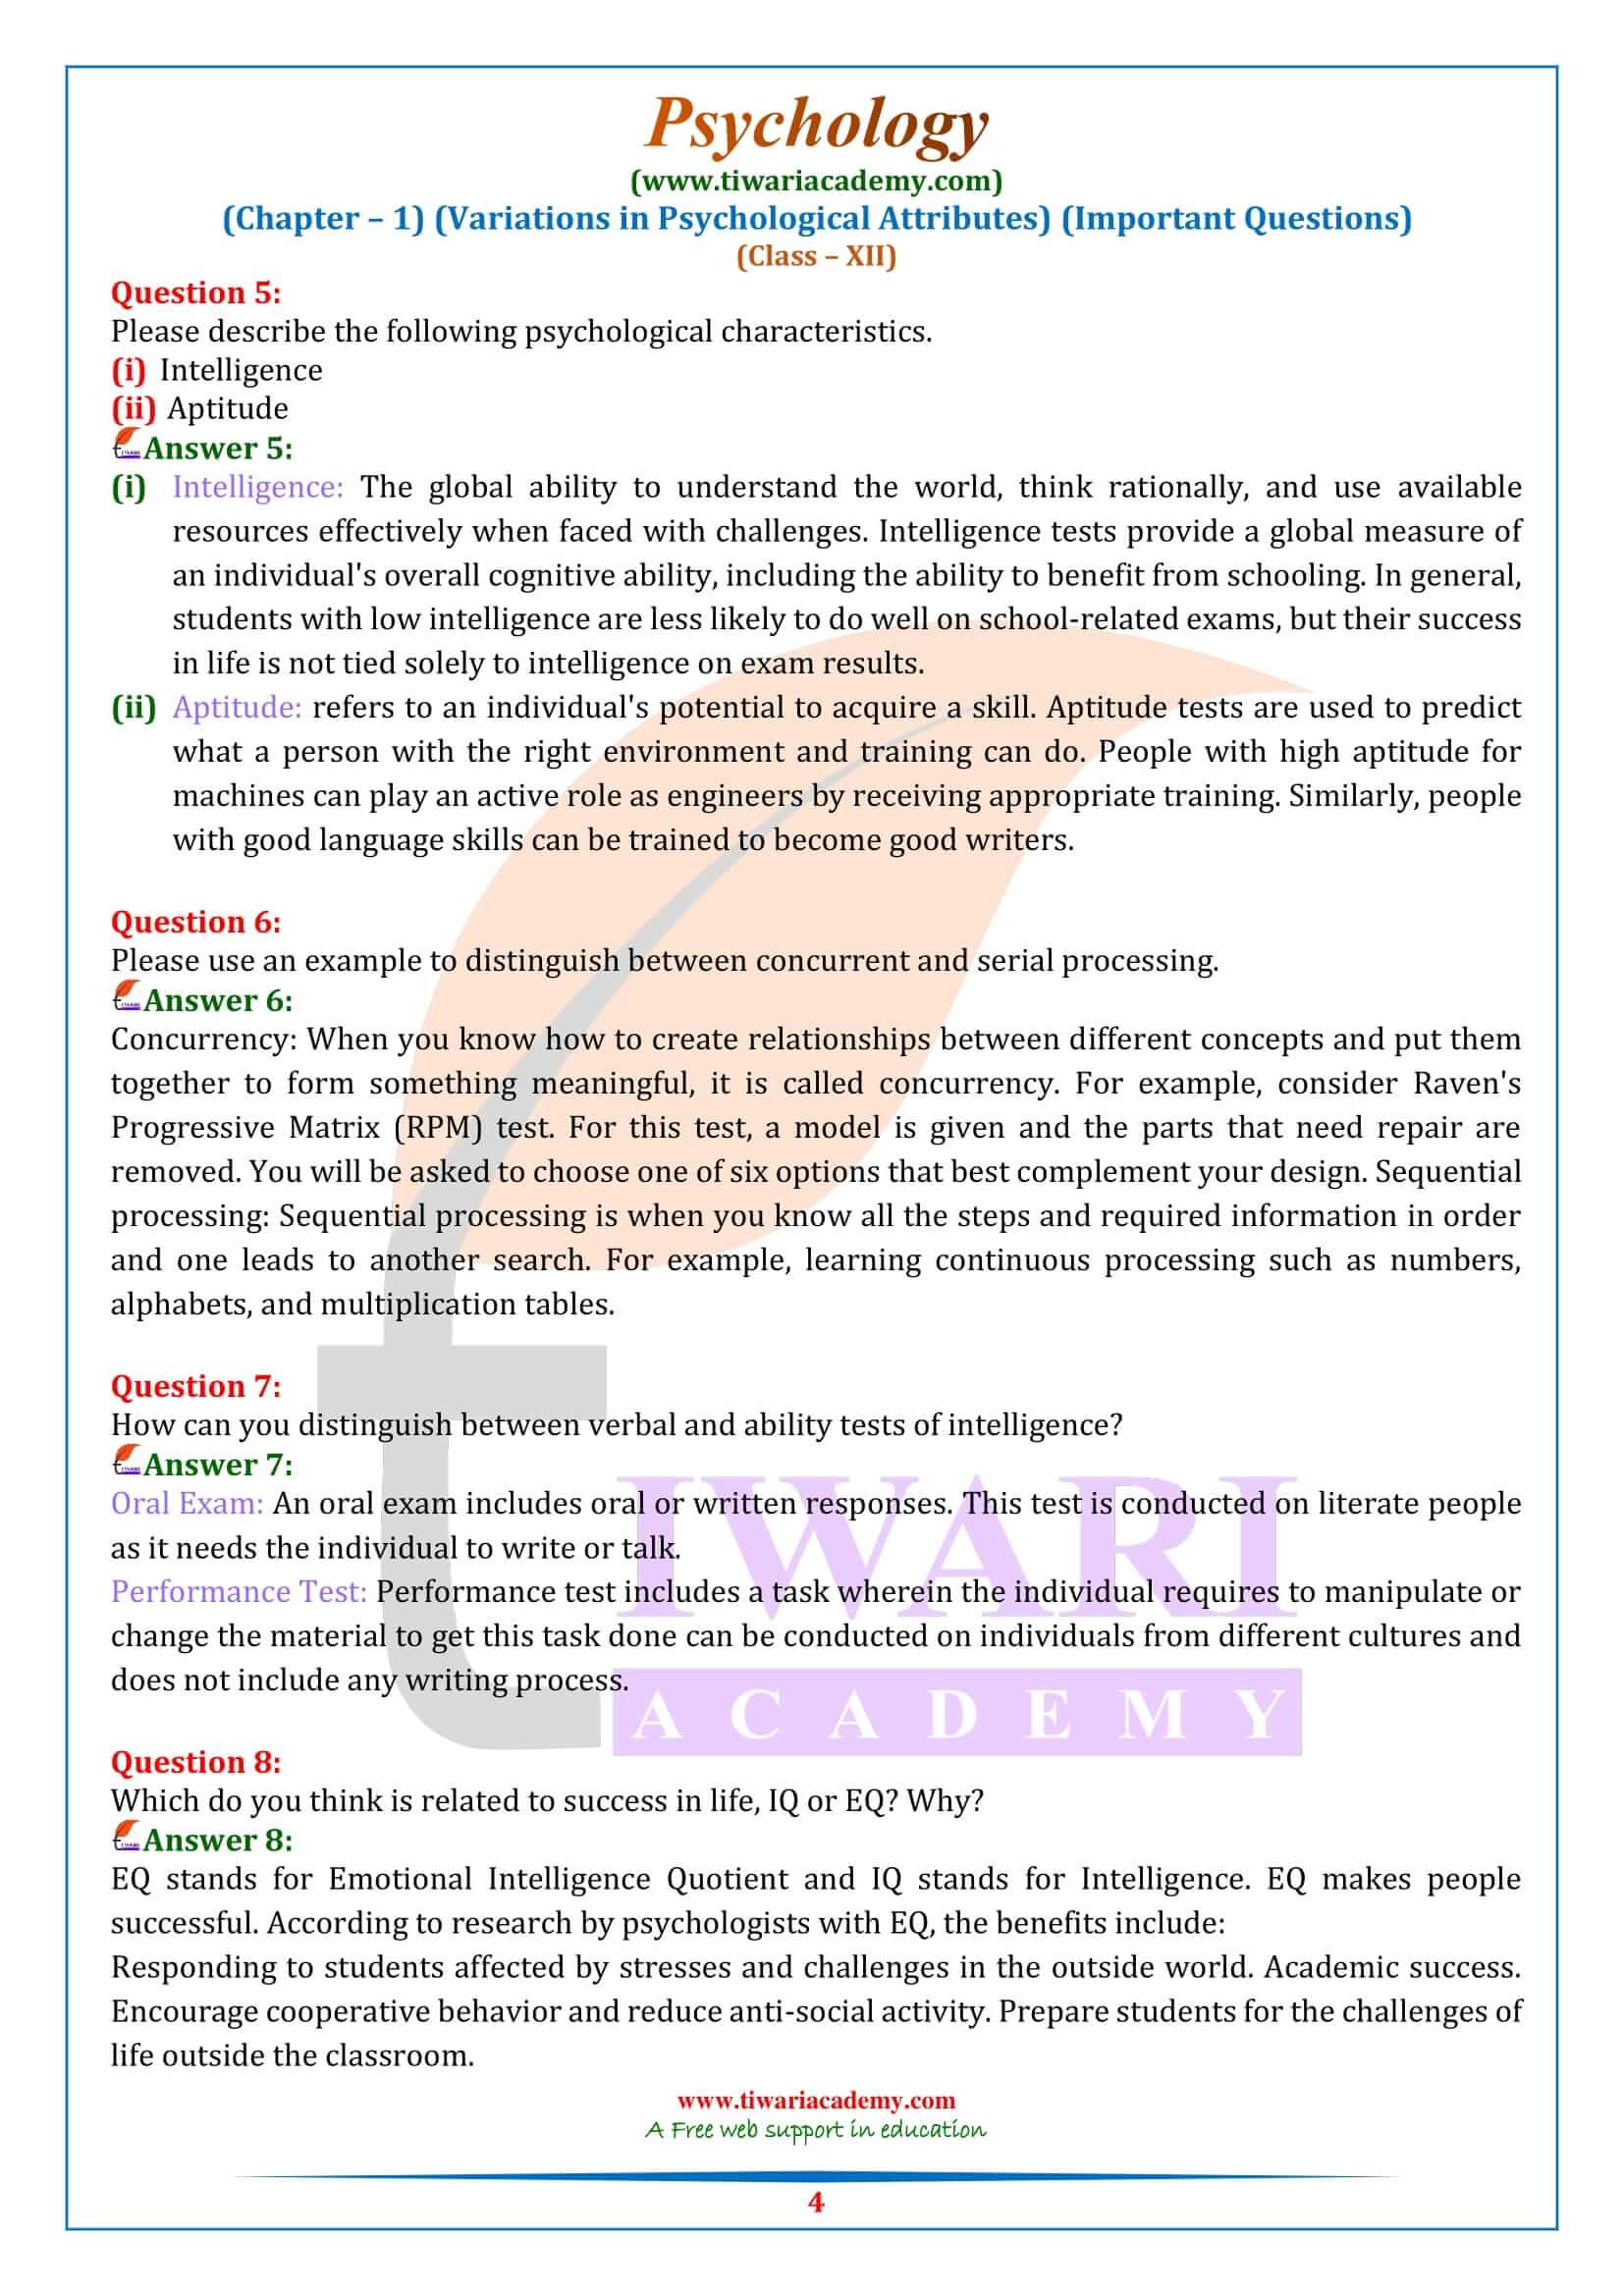 Class 12 Psychology Chapter 1 Important Questions Answers